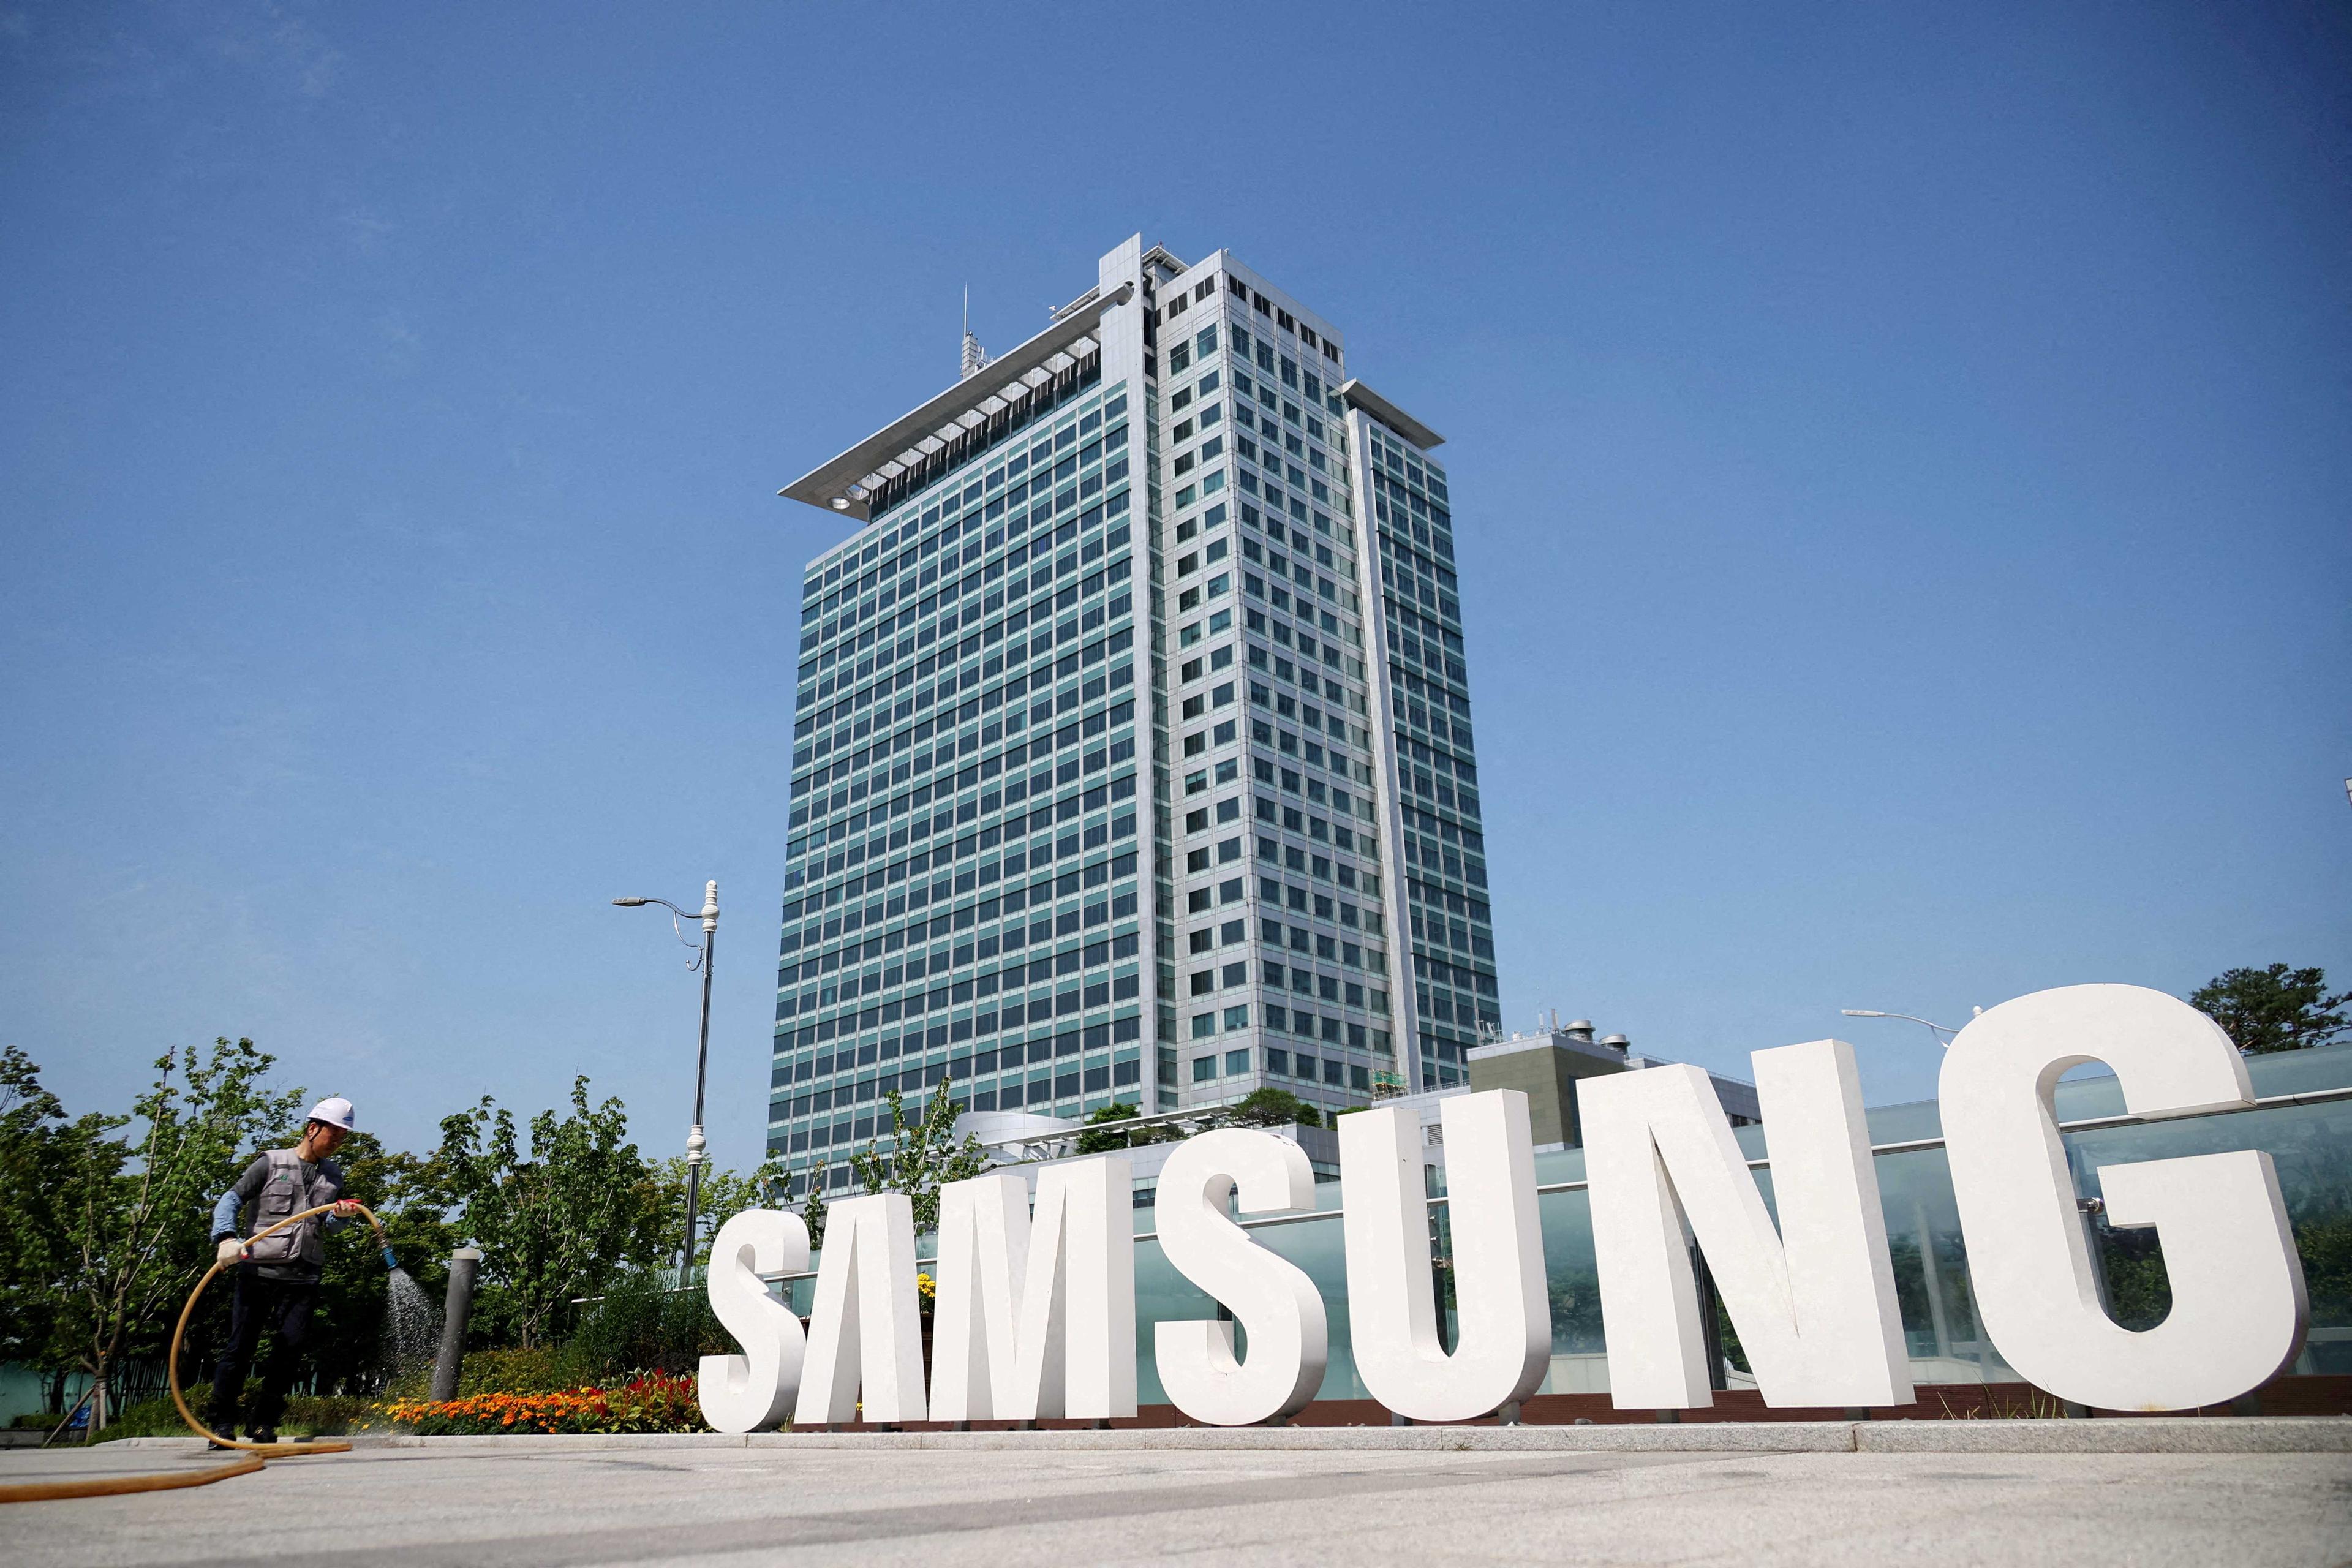 A worker waters a flower bed next to the logo of Samsung Electronics during a media tour at Samsung Electronics' headquarters in Suwon, South Korea, June 13. Photo: Reuters